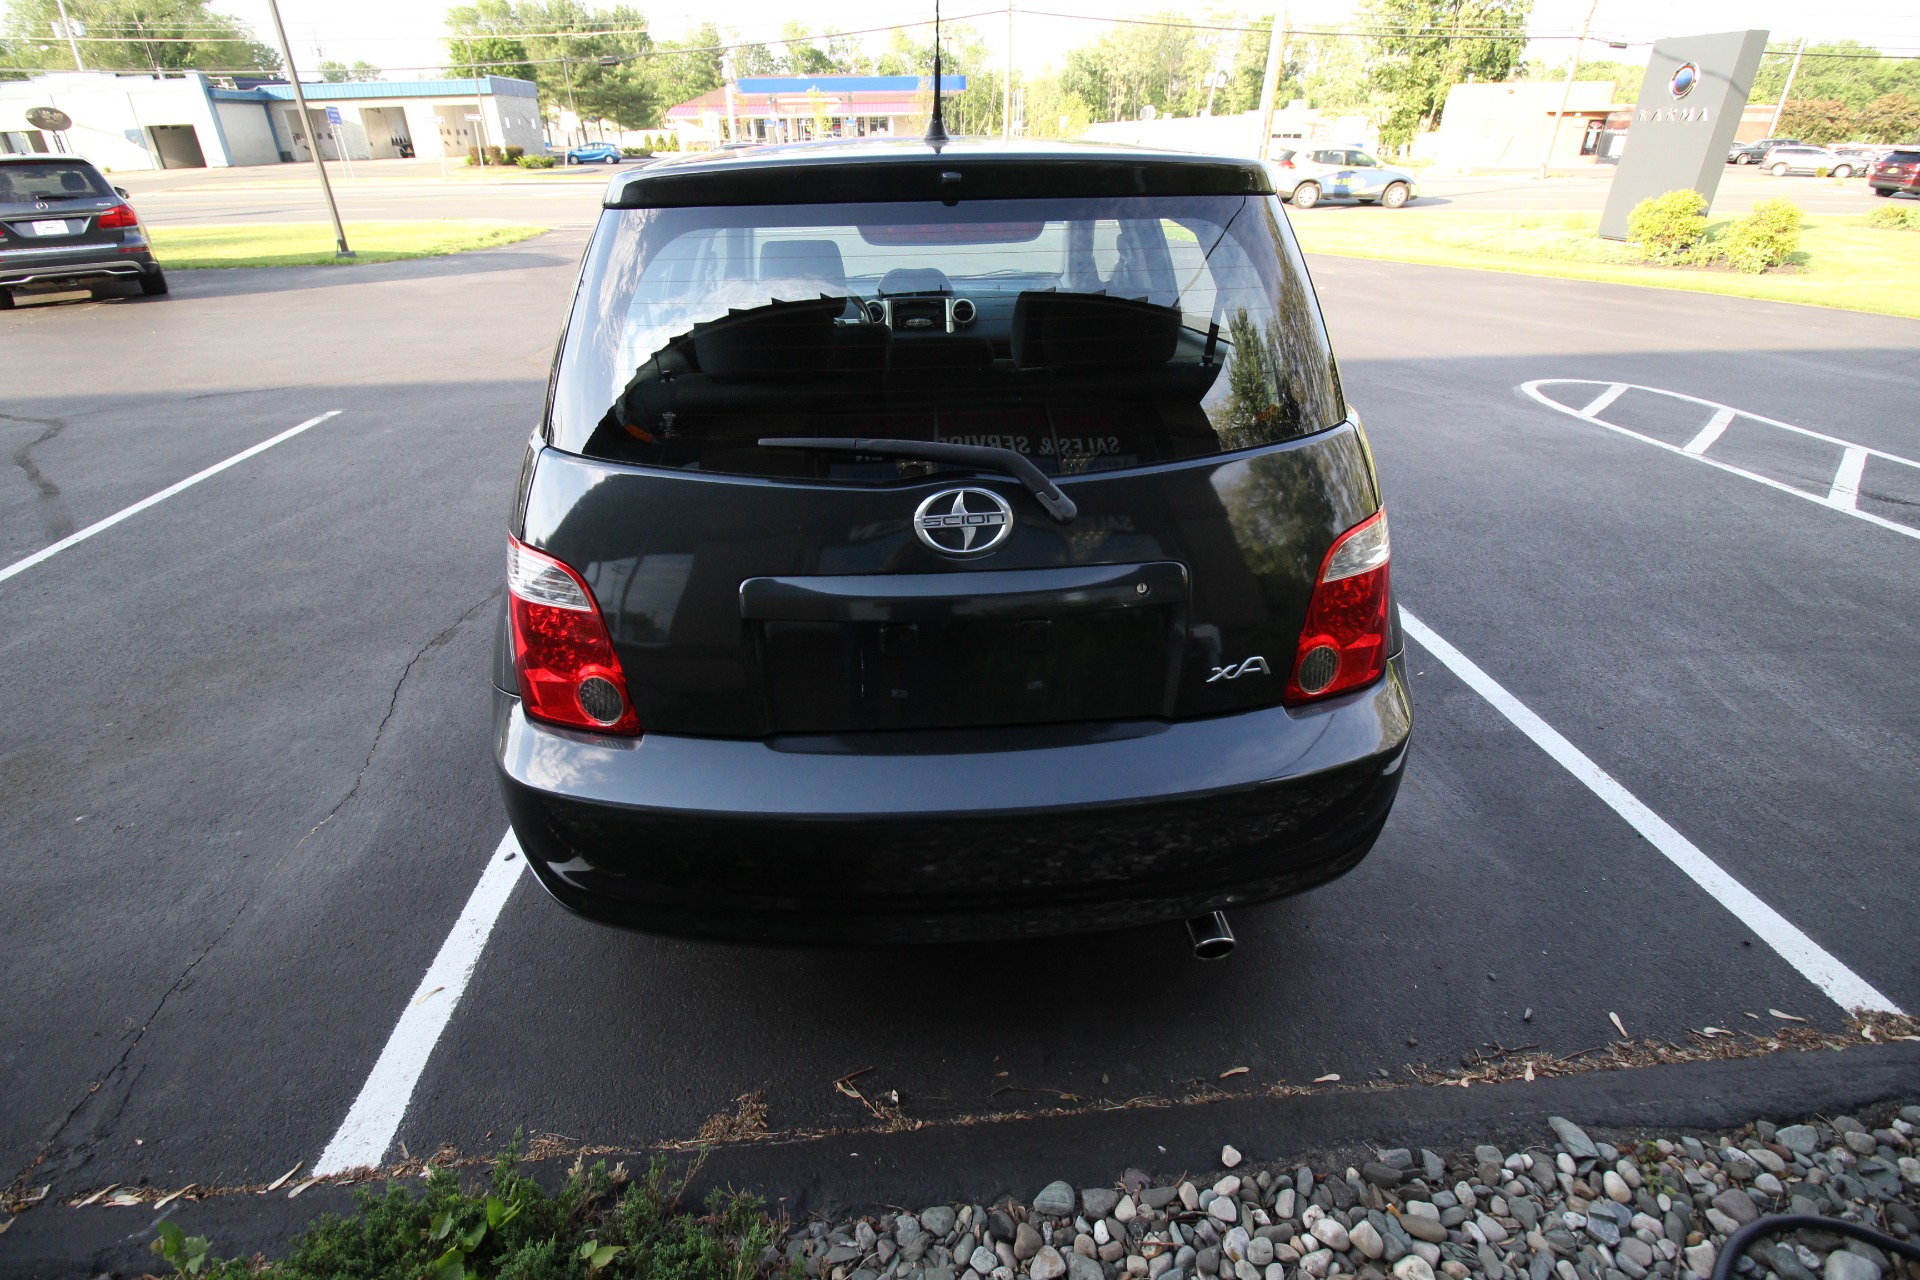 Used 2006 DARK GREY Scion xA Hatchback 1 OWNER NEW CAR TRADE WITH US LOW MILES | Albany, NY